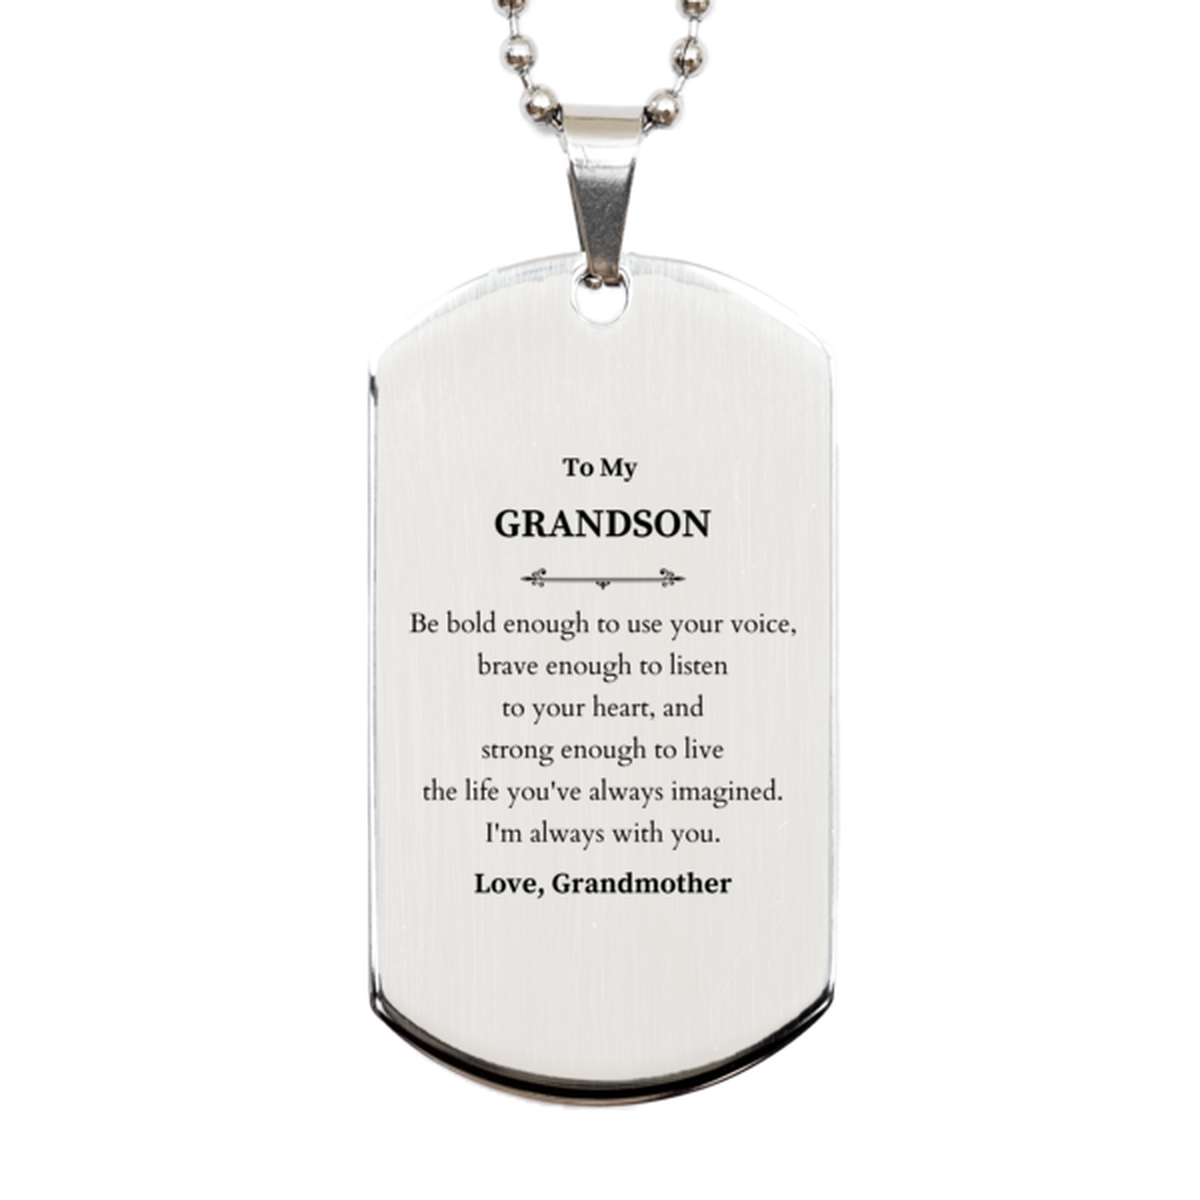 Keepsake Grandson Silver Dog Tag Gift Idea Graduation Christmas Birthday Grandson from Grandmother, Grandson Be bold enough to use your voice, brave enough to listen to your heart. Love, Grandmother